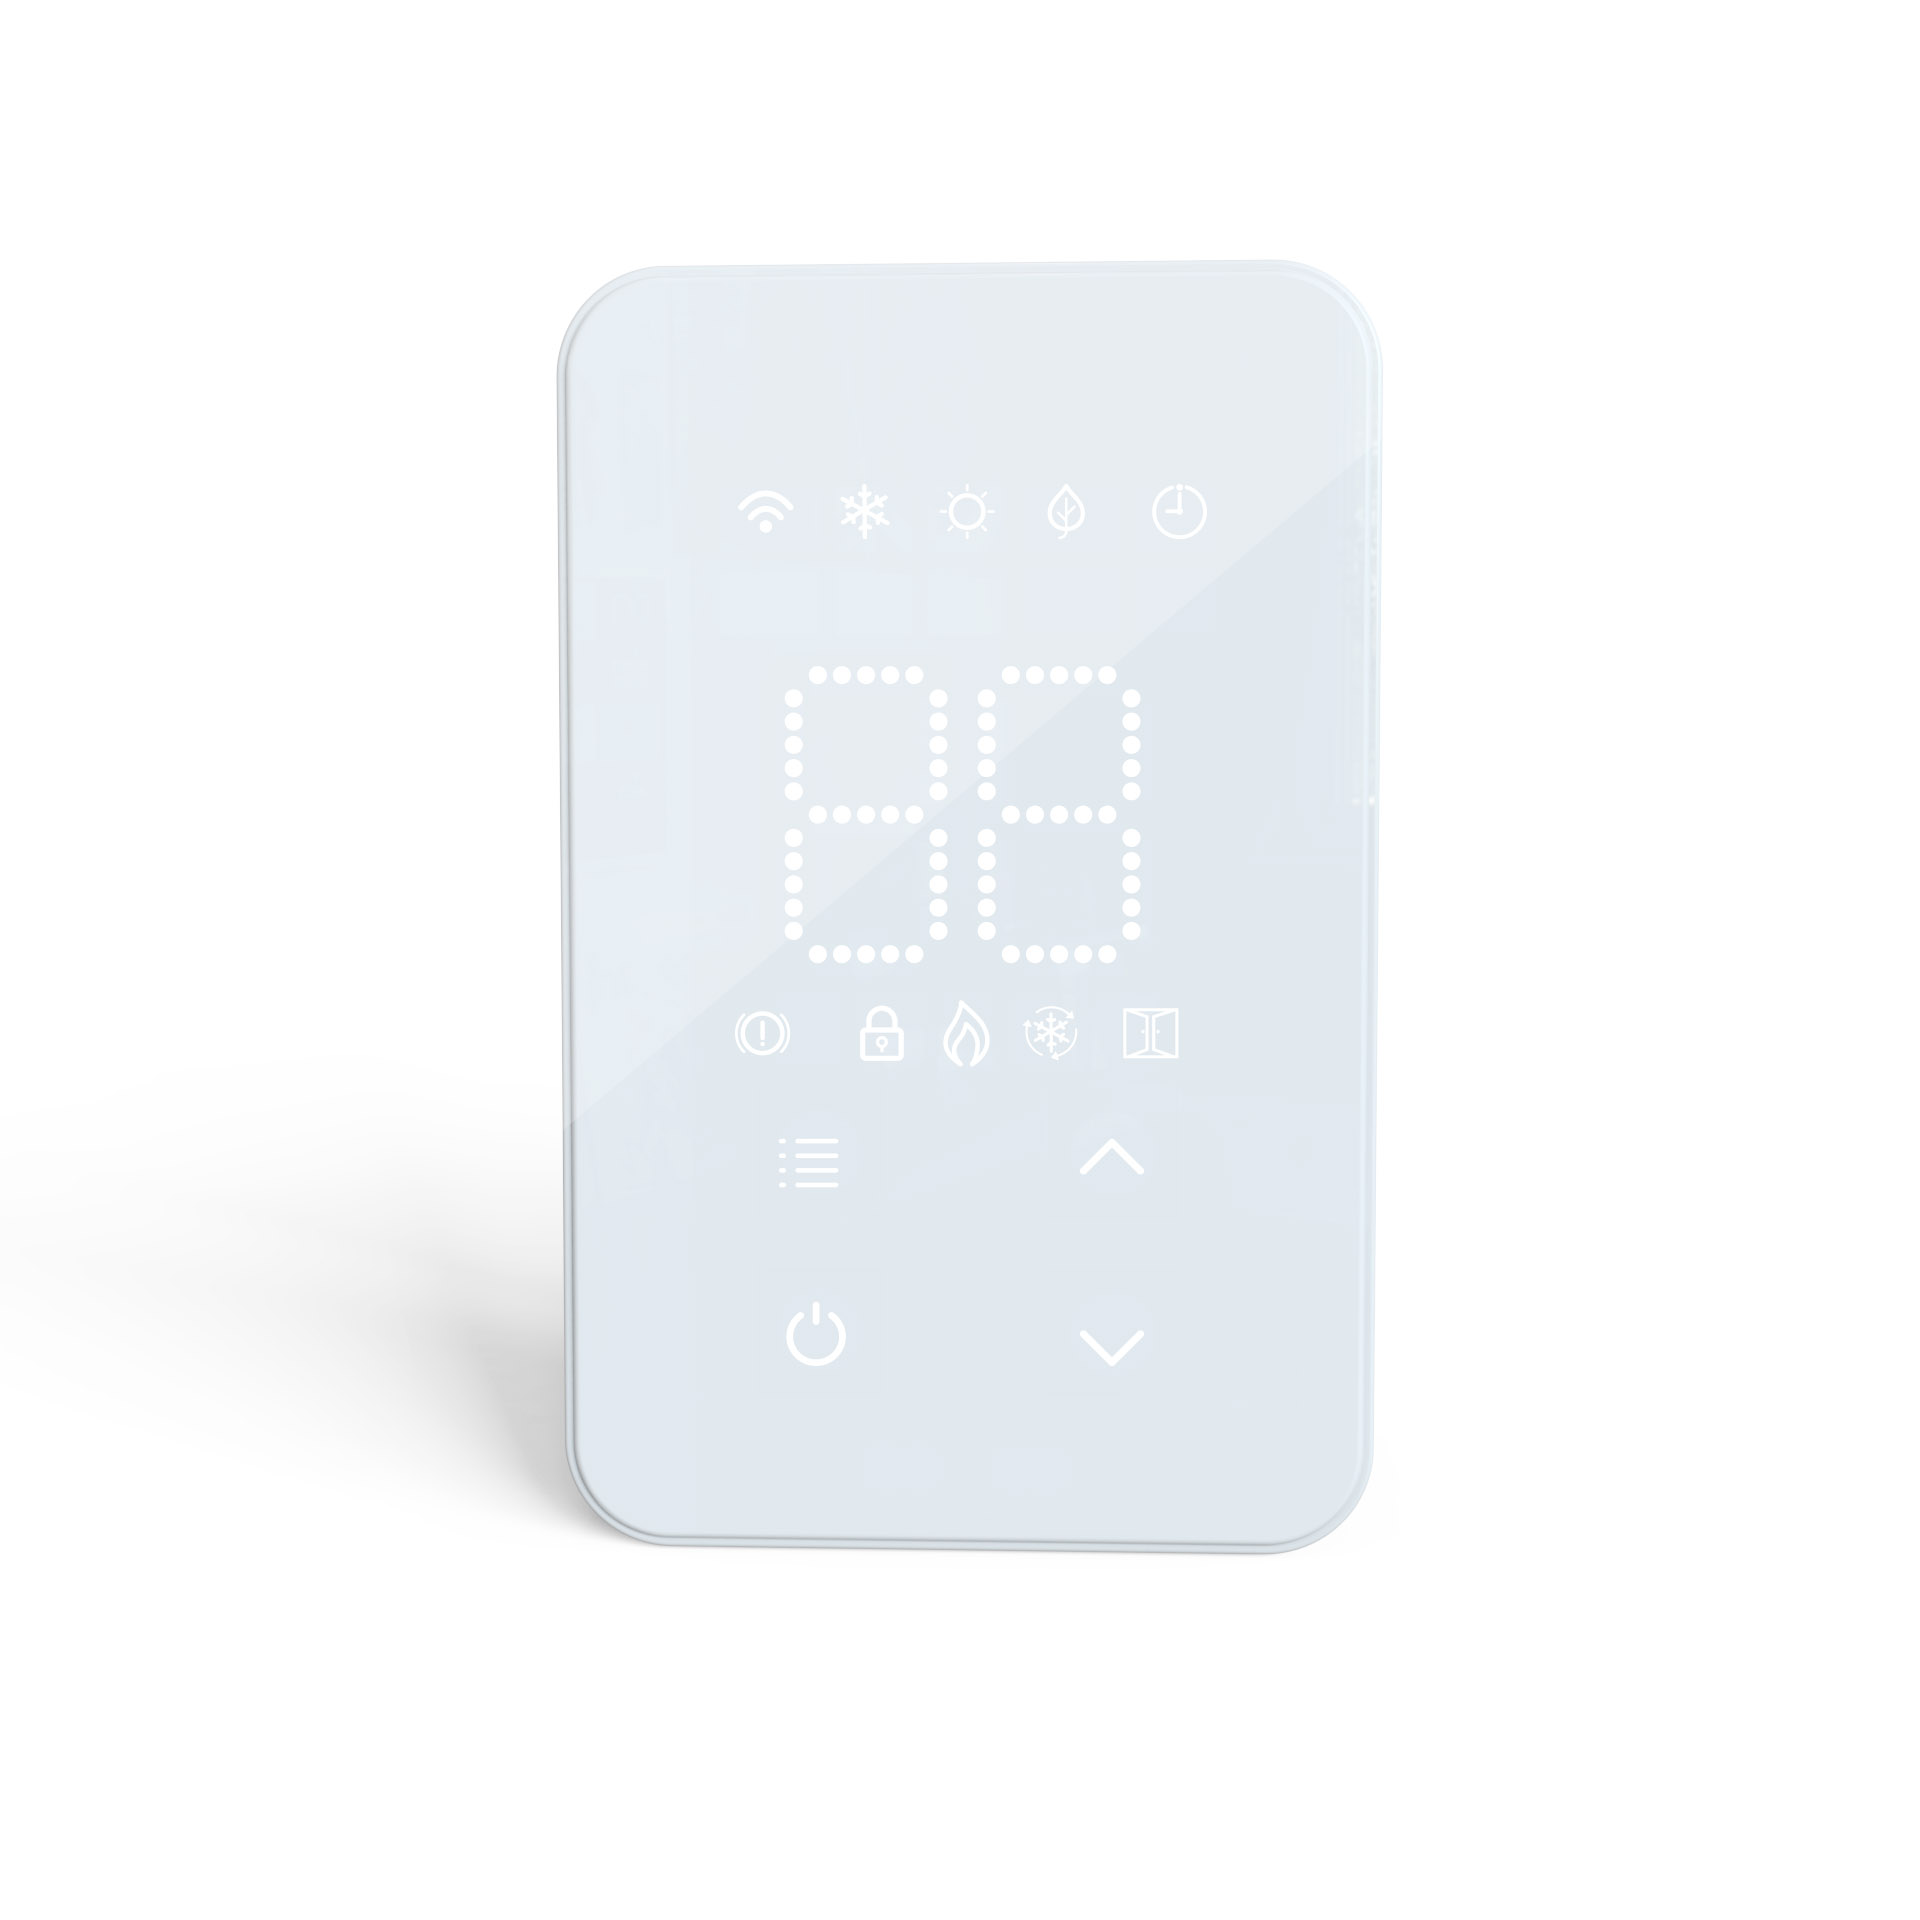 240Vac Input Smart Tuya WiFi Thermostat for Electric Baseboard Heaters for North American Market